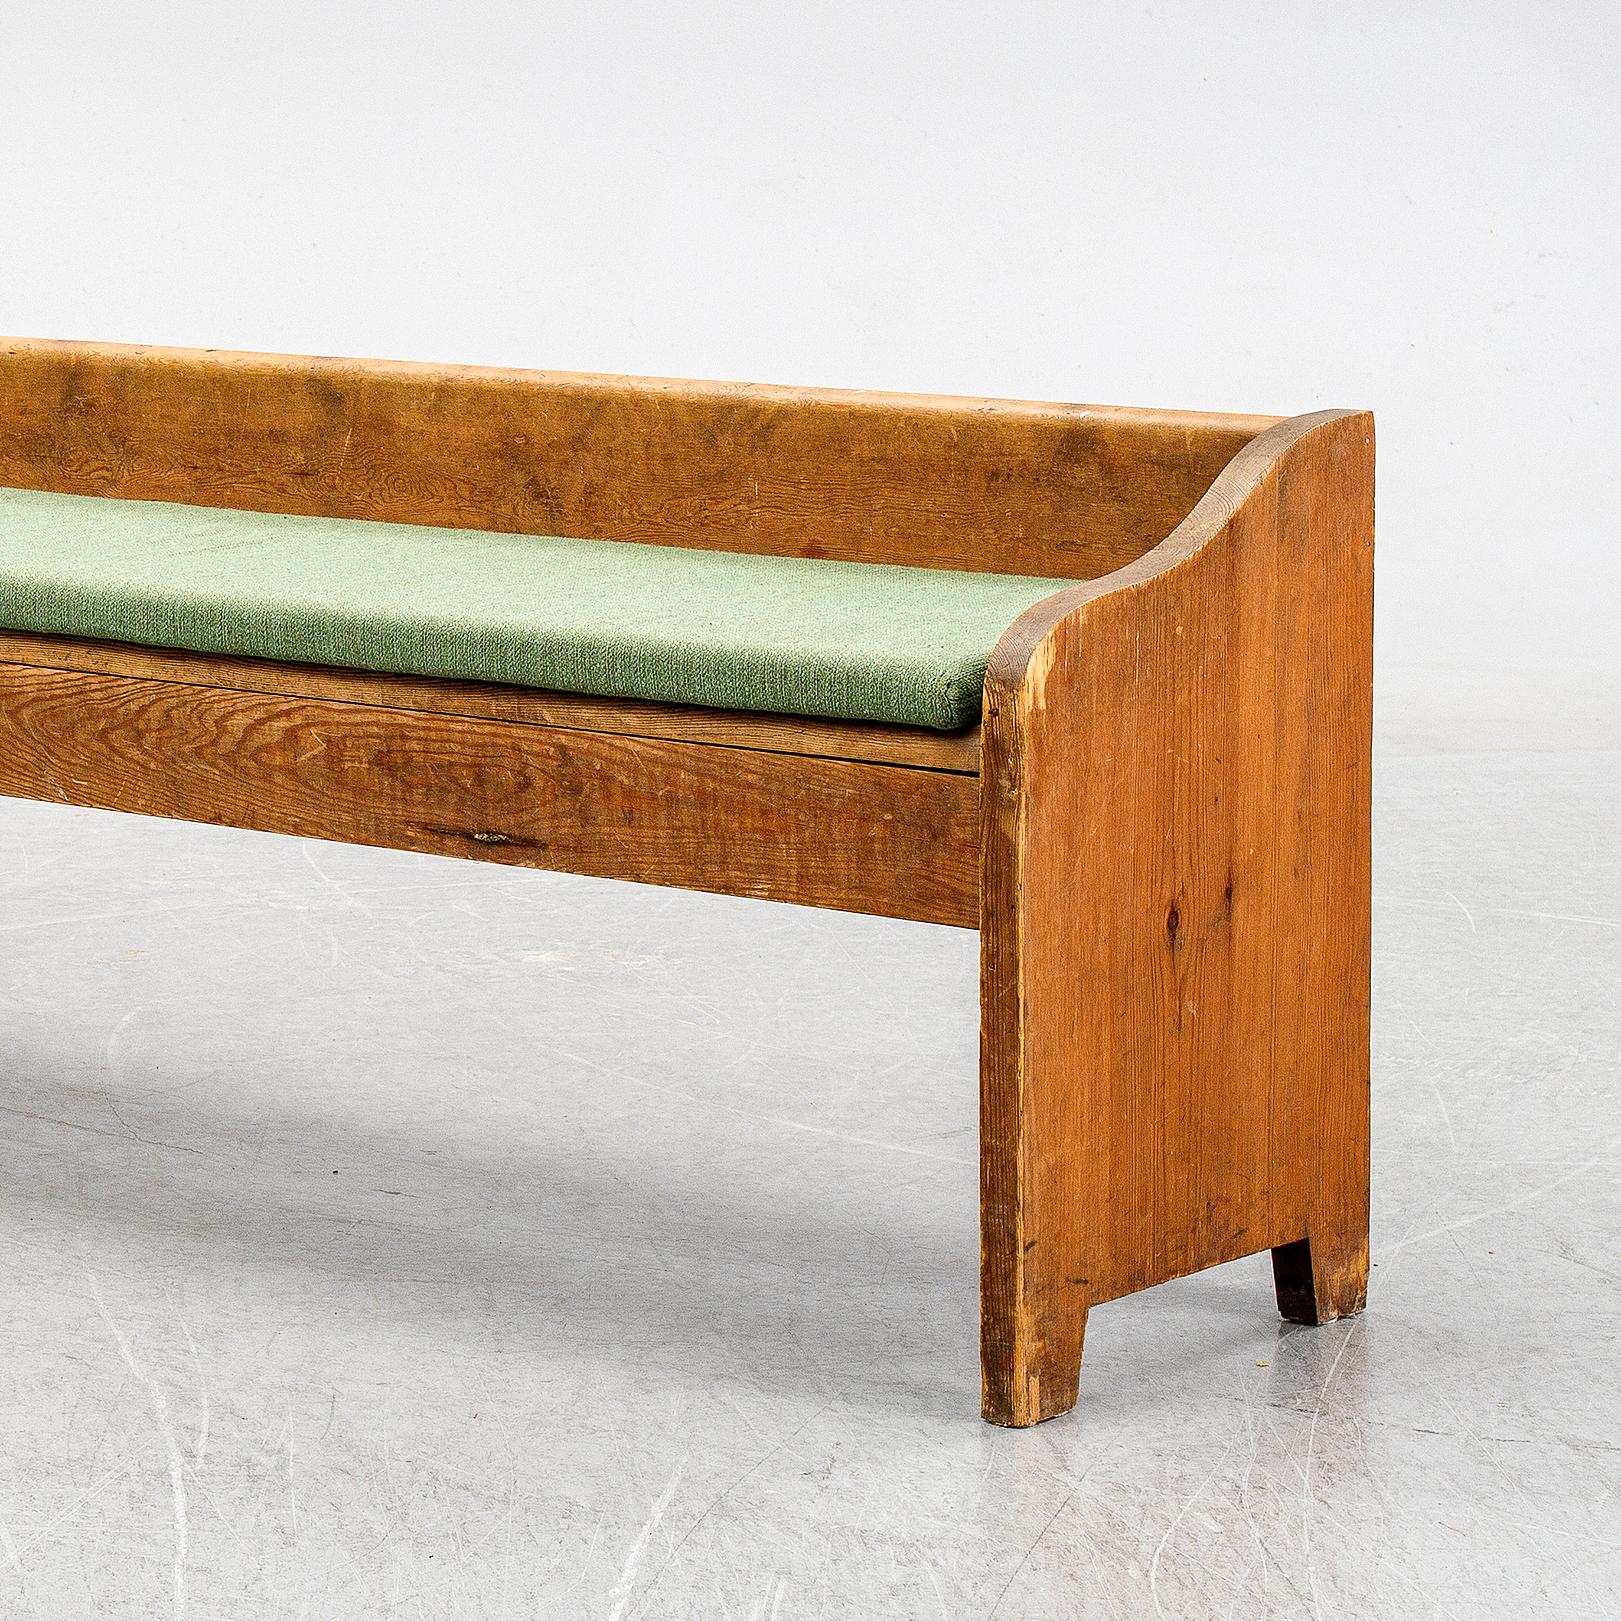 Rare sofa in solid pine and original condition in style of Axel Einar Hjorth's designs for Nordiska Kompaniet Stockholm in the 1930s. Original green wool cushion included and the overall condition is great and the sofa is stable and good to use.